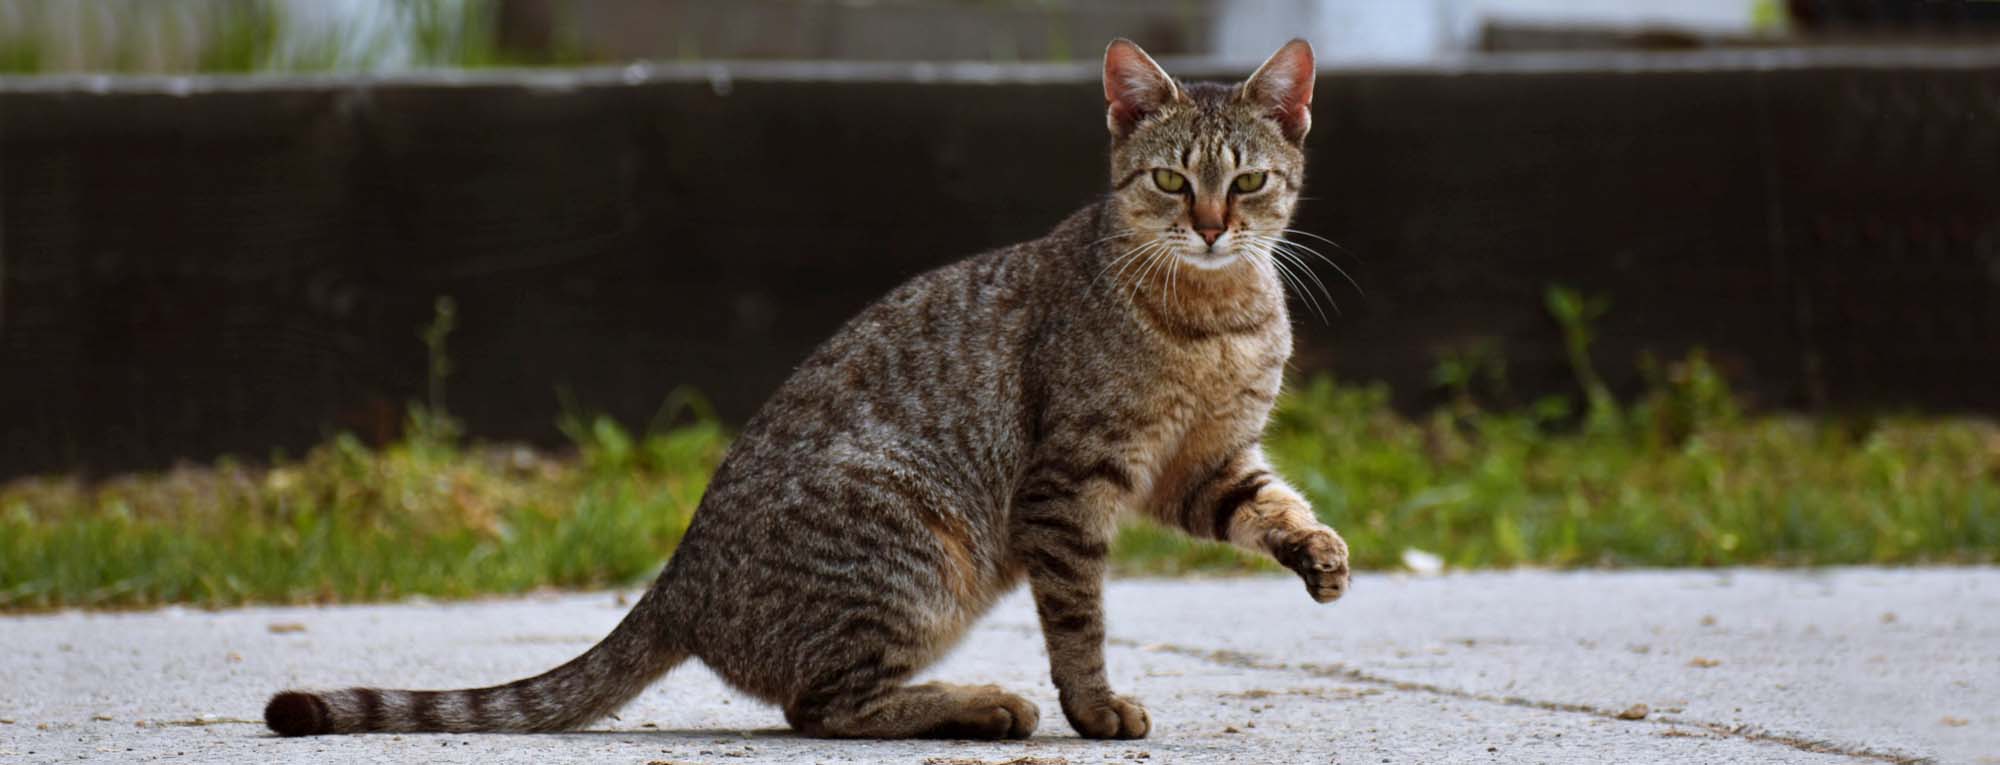 A cat limping due to osteomyelitis